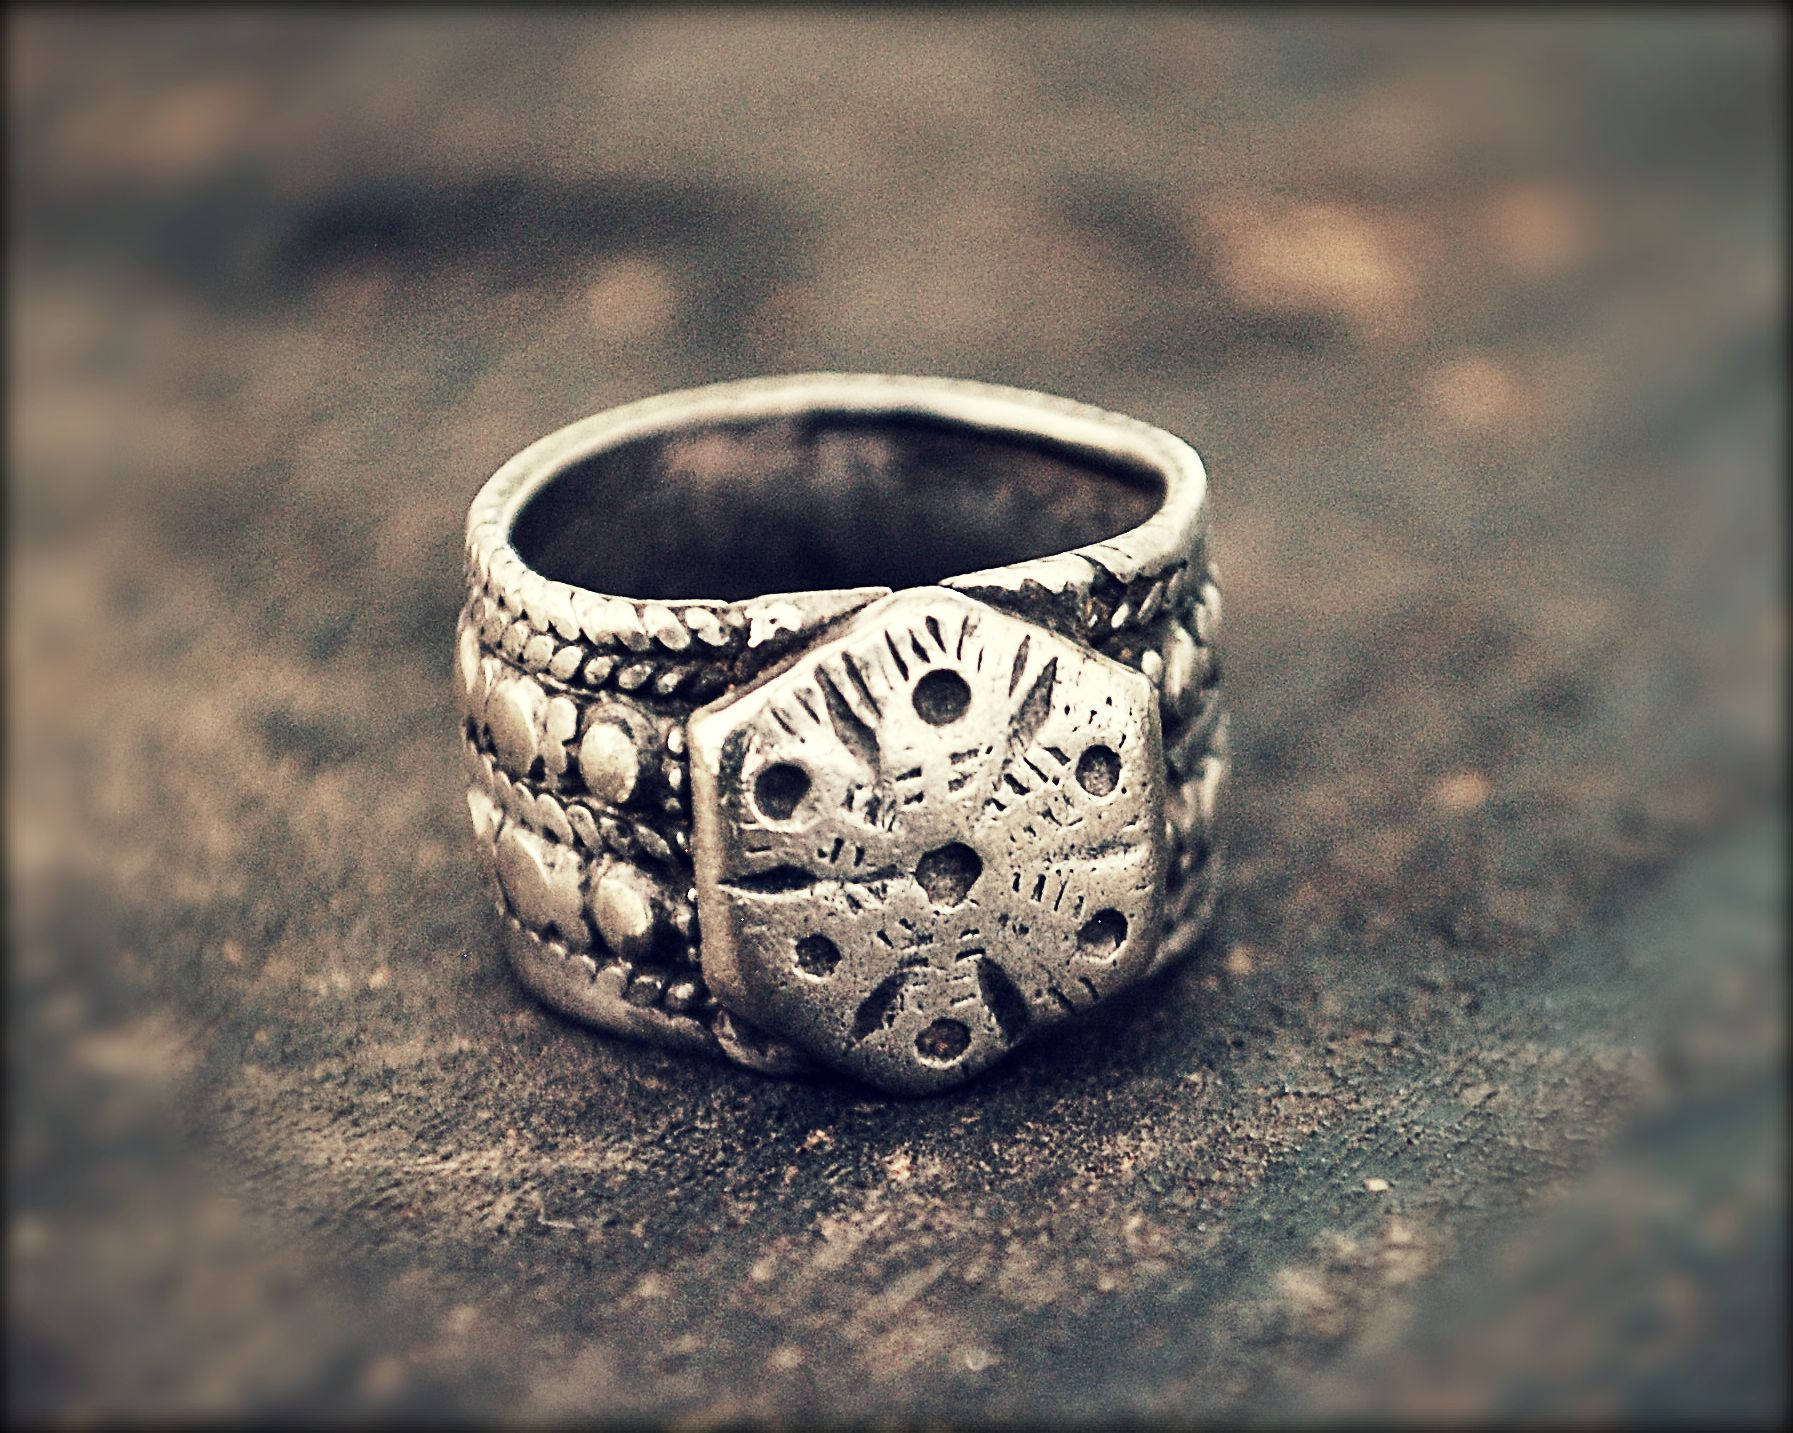 Antique Tribal Rajasthan Silver Ring - Size 5.5